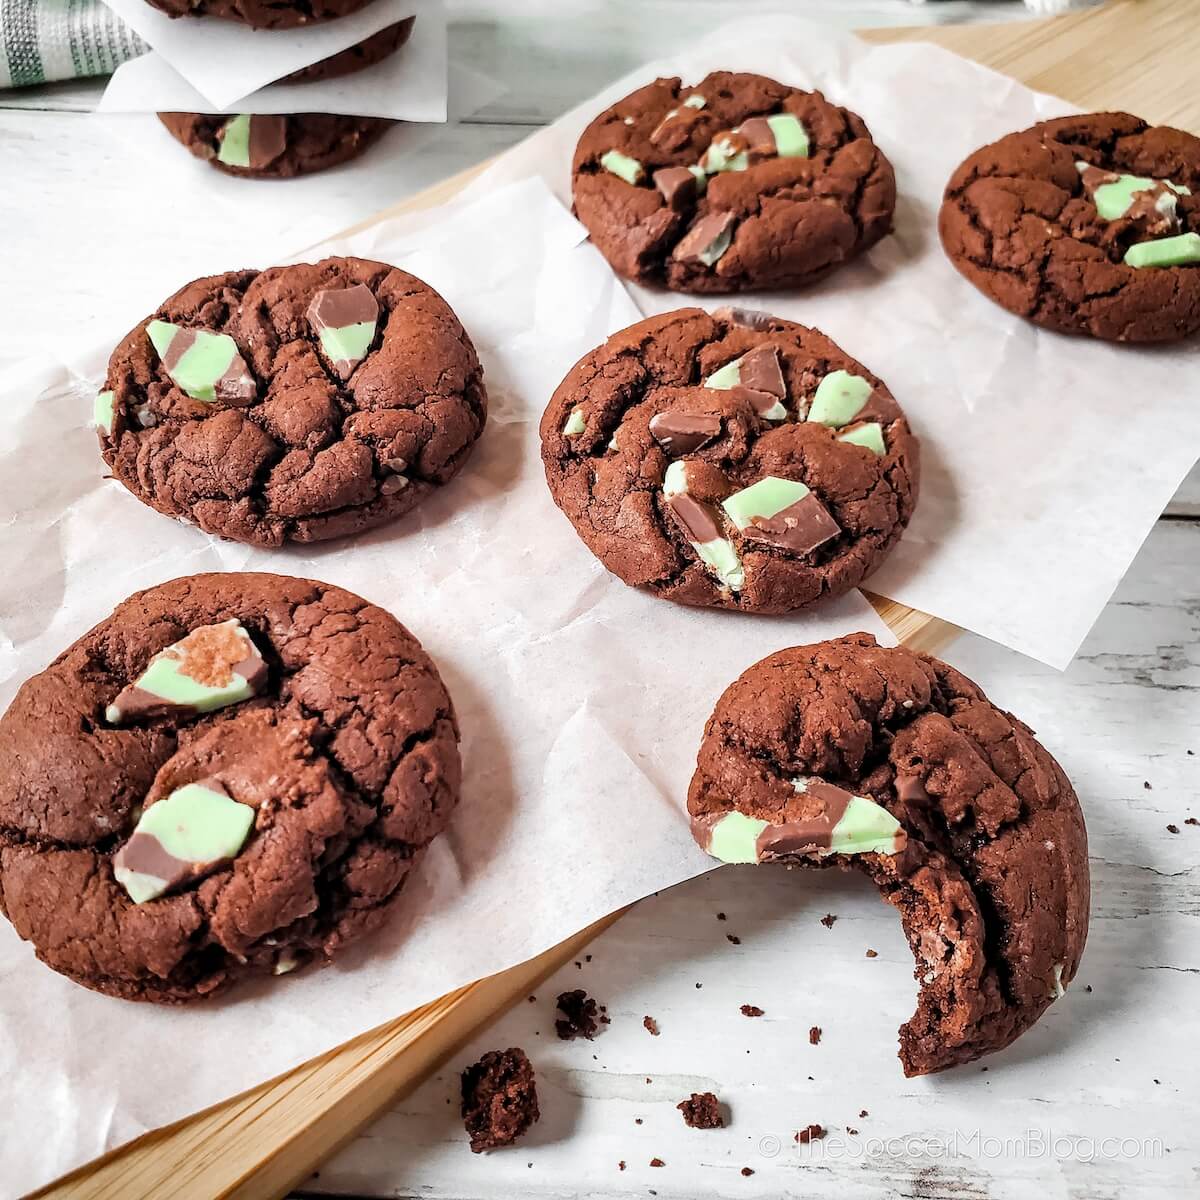 Six Chocolate Mint Chip Cookies on parchment paper